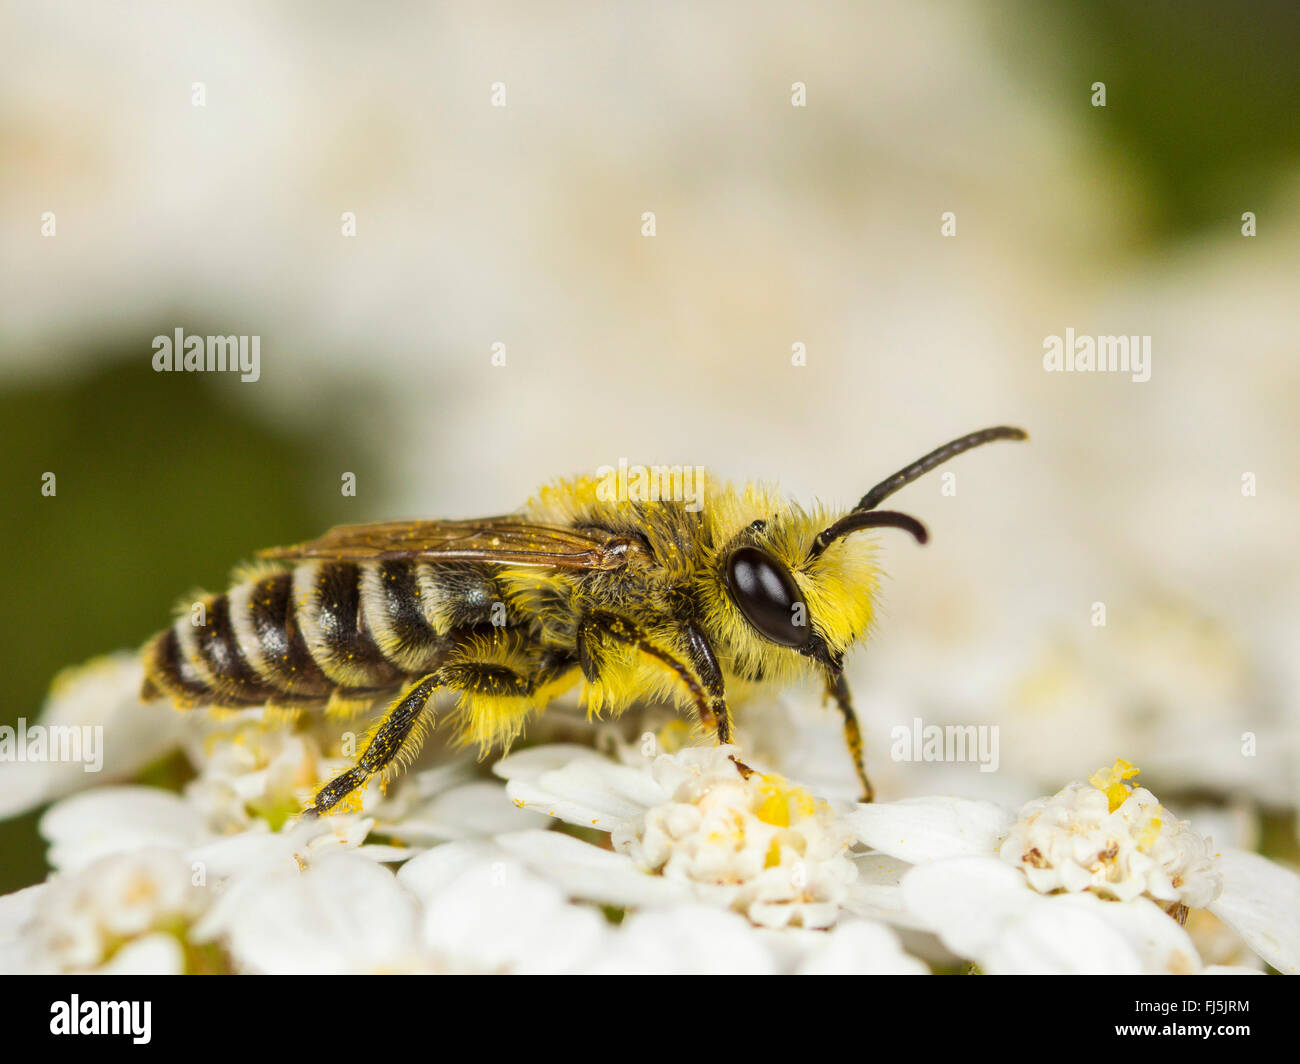 Hairy-saddled Colletes (Colletes fodiens), Male foraging on Common Yarrow (Achillea millefolium), Germany Stock Photo